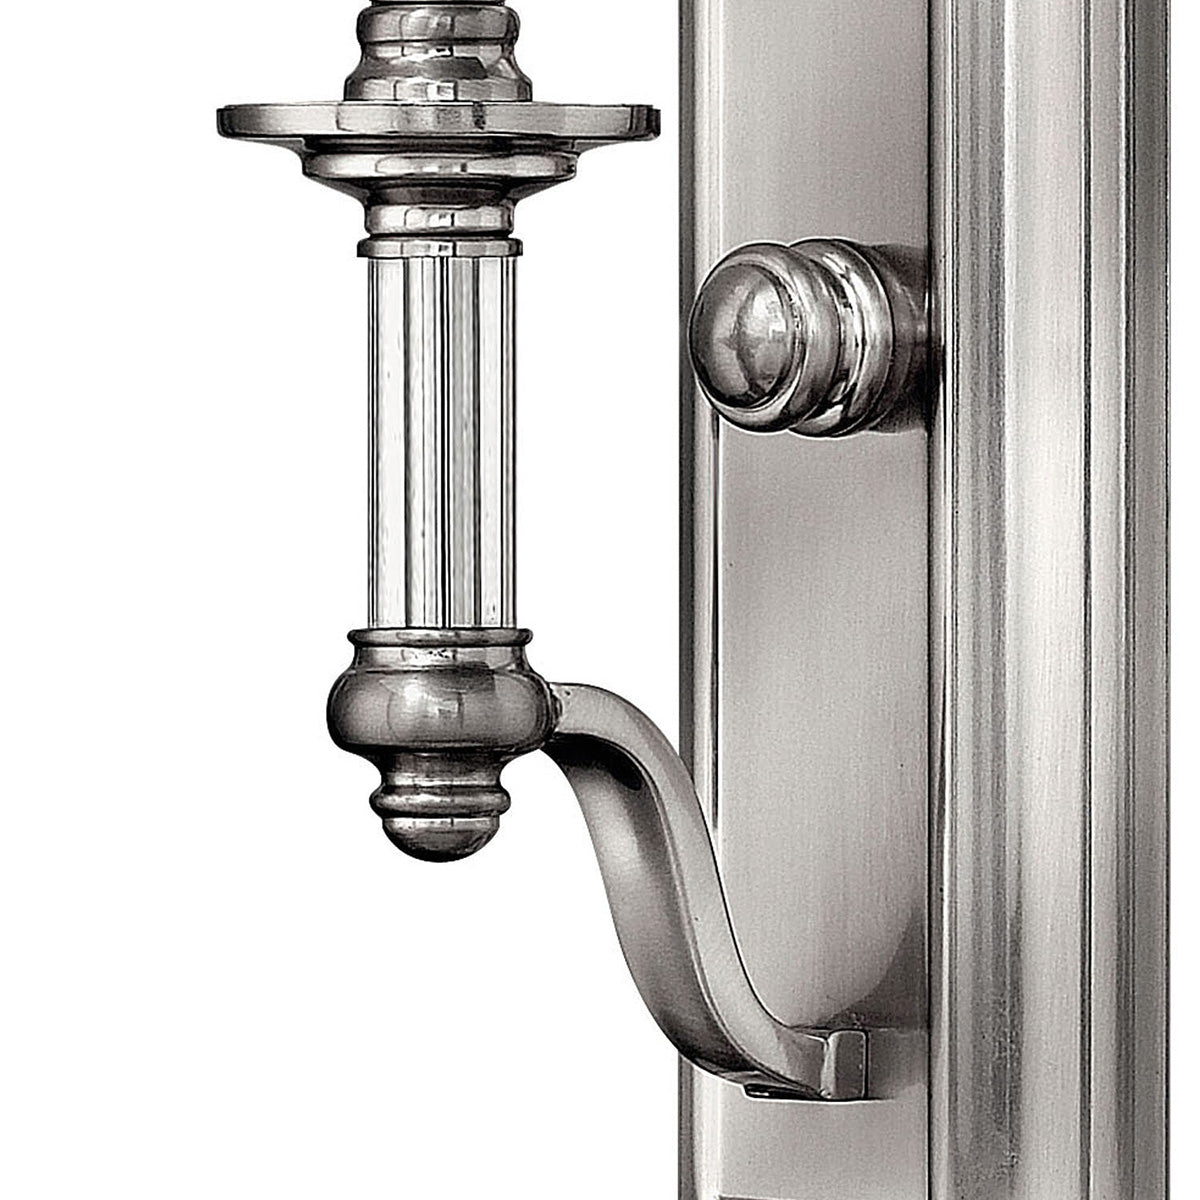 Sussex 1L wall sconce - 4790BN